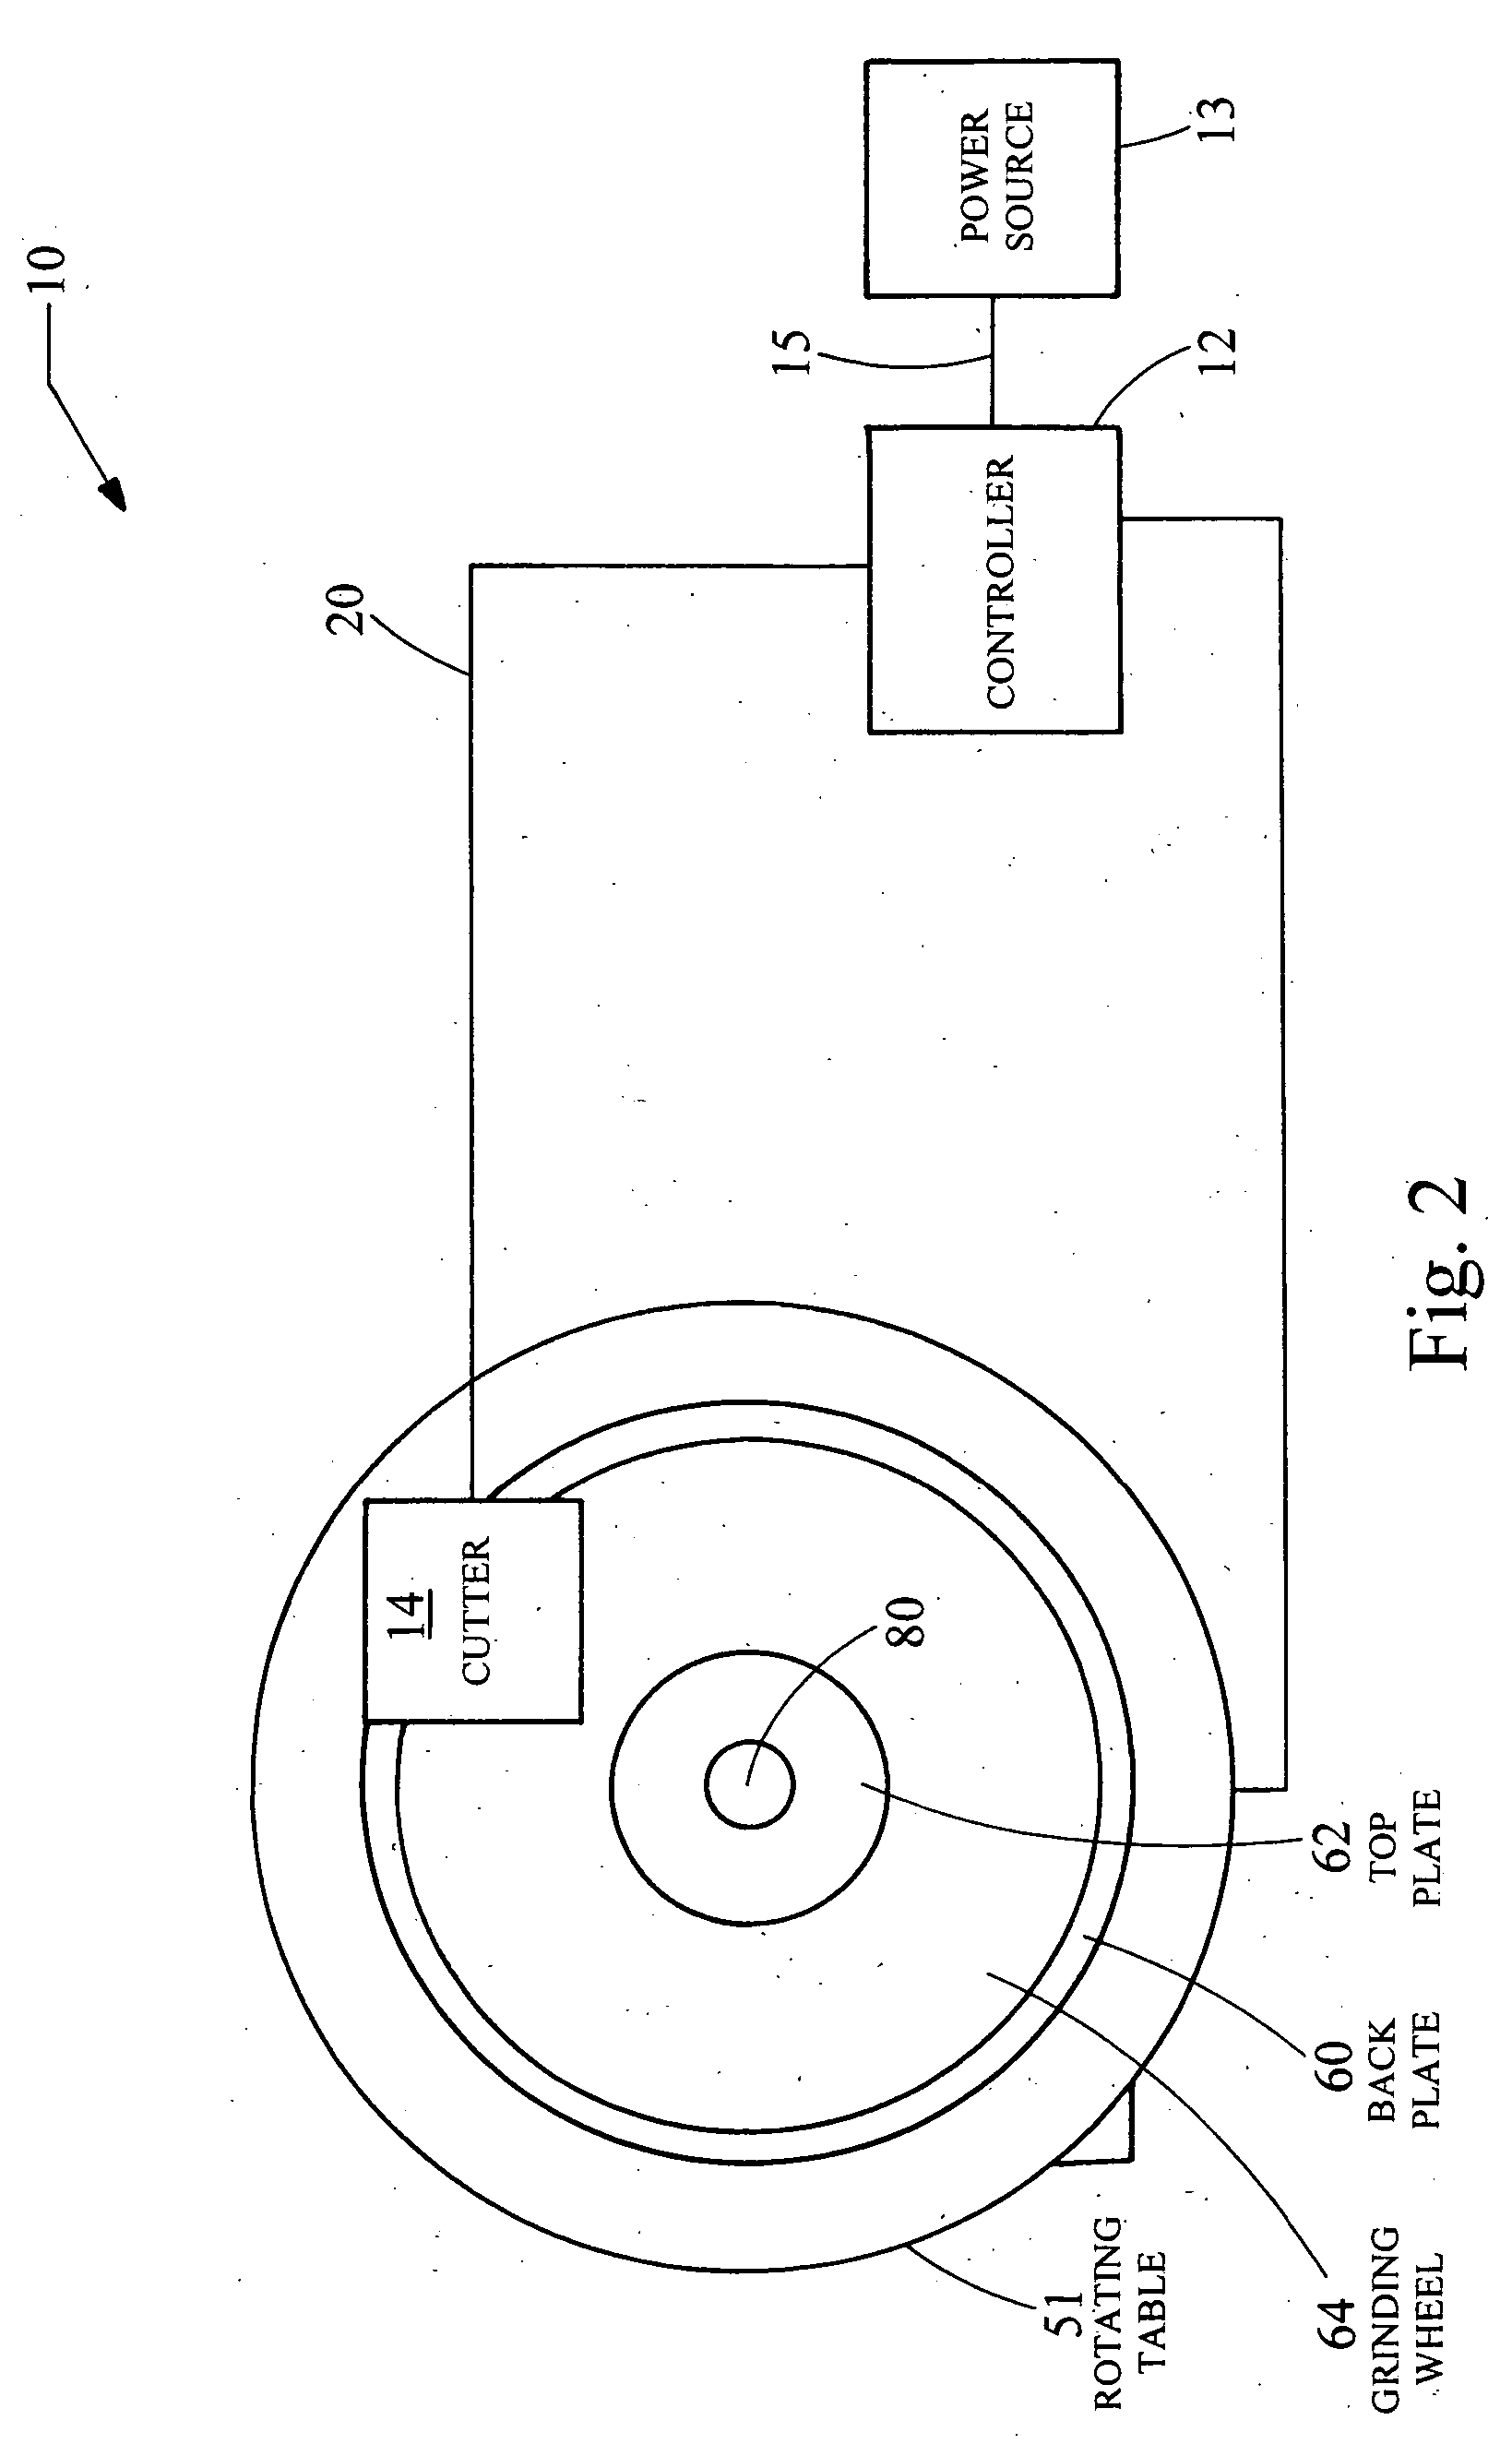 Assembly and a method for cutting or forming an object